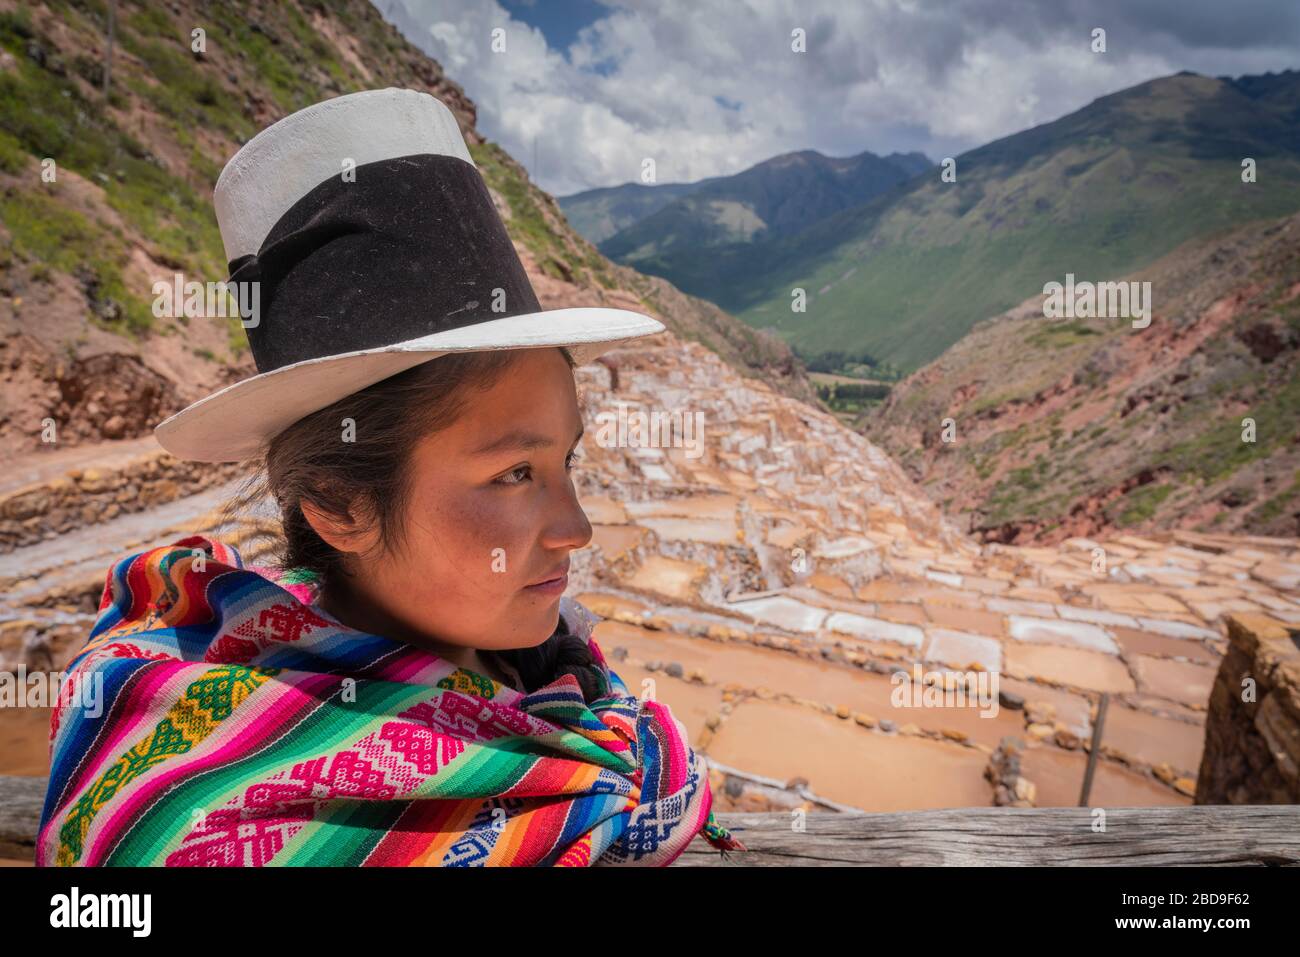 Quechua Mesbize (mixed race signified by white hat) at Salinaras District of Maras overlooking the salt ponds in Peru. Stock Photo